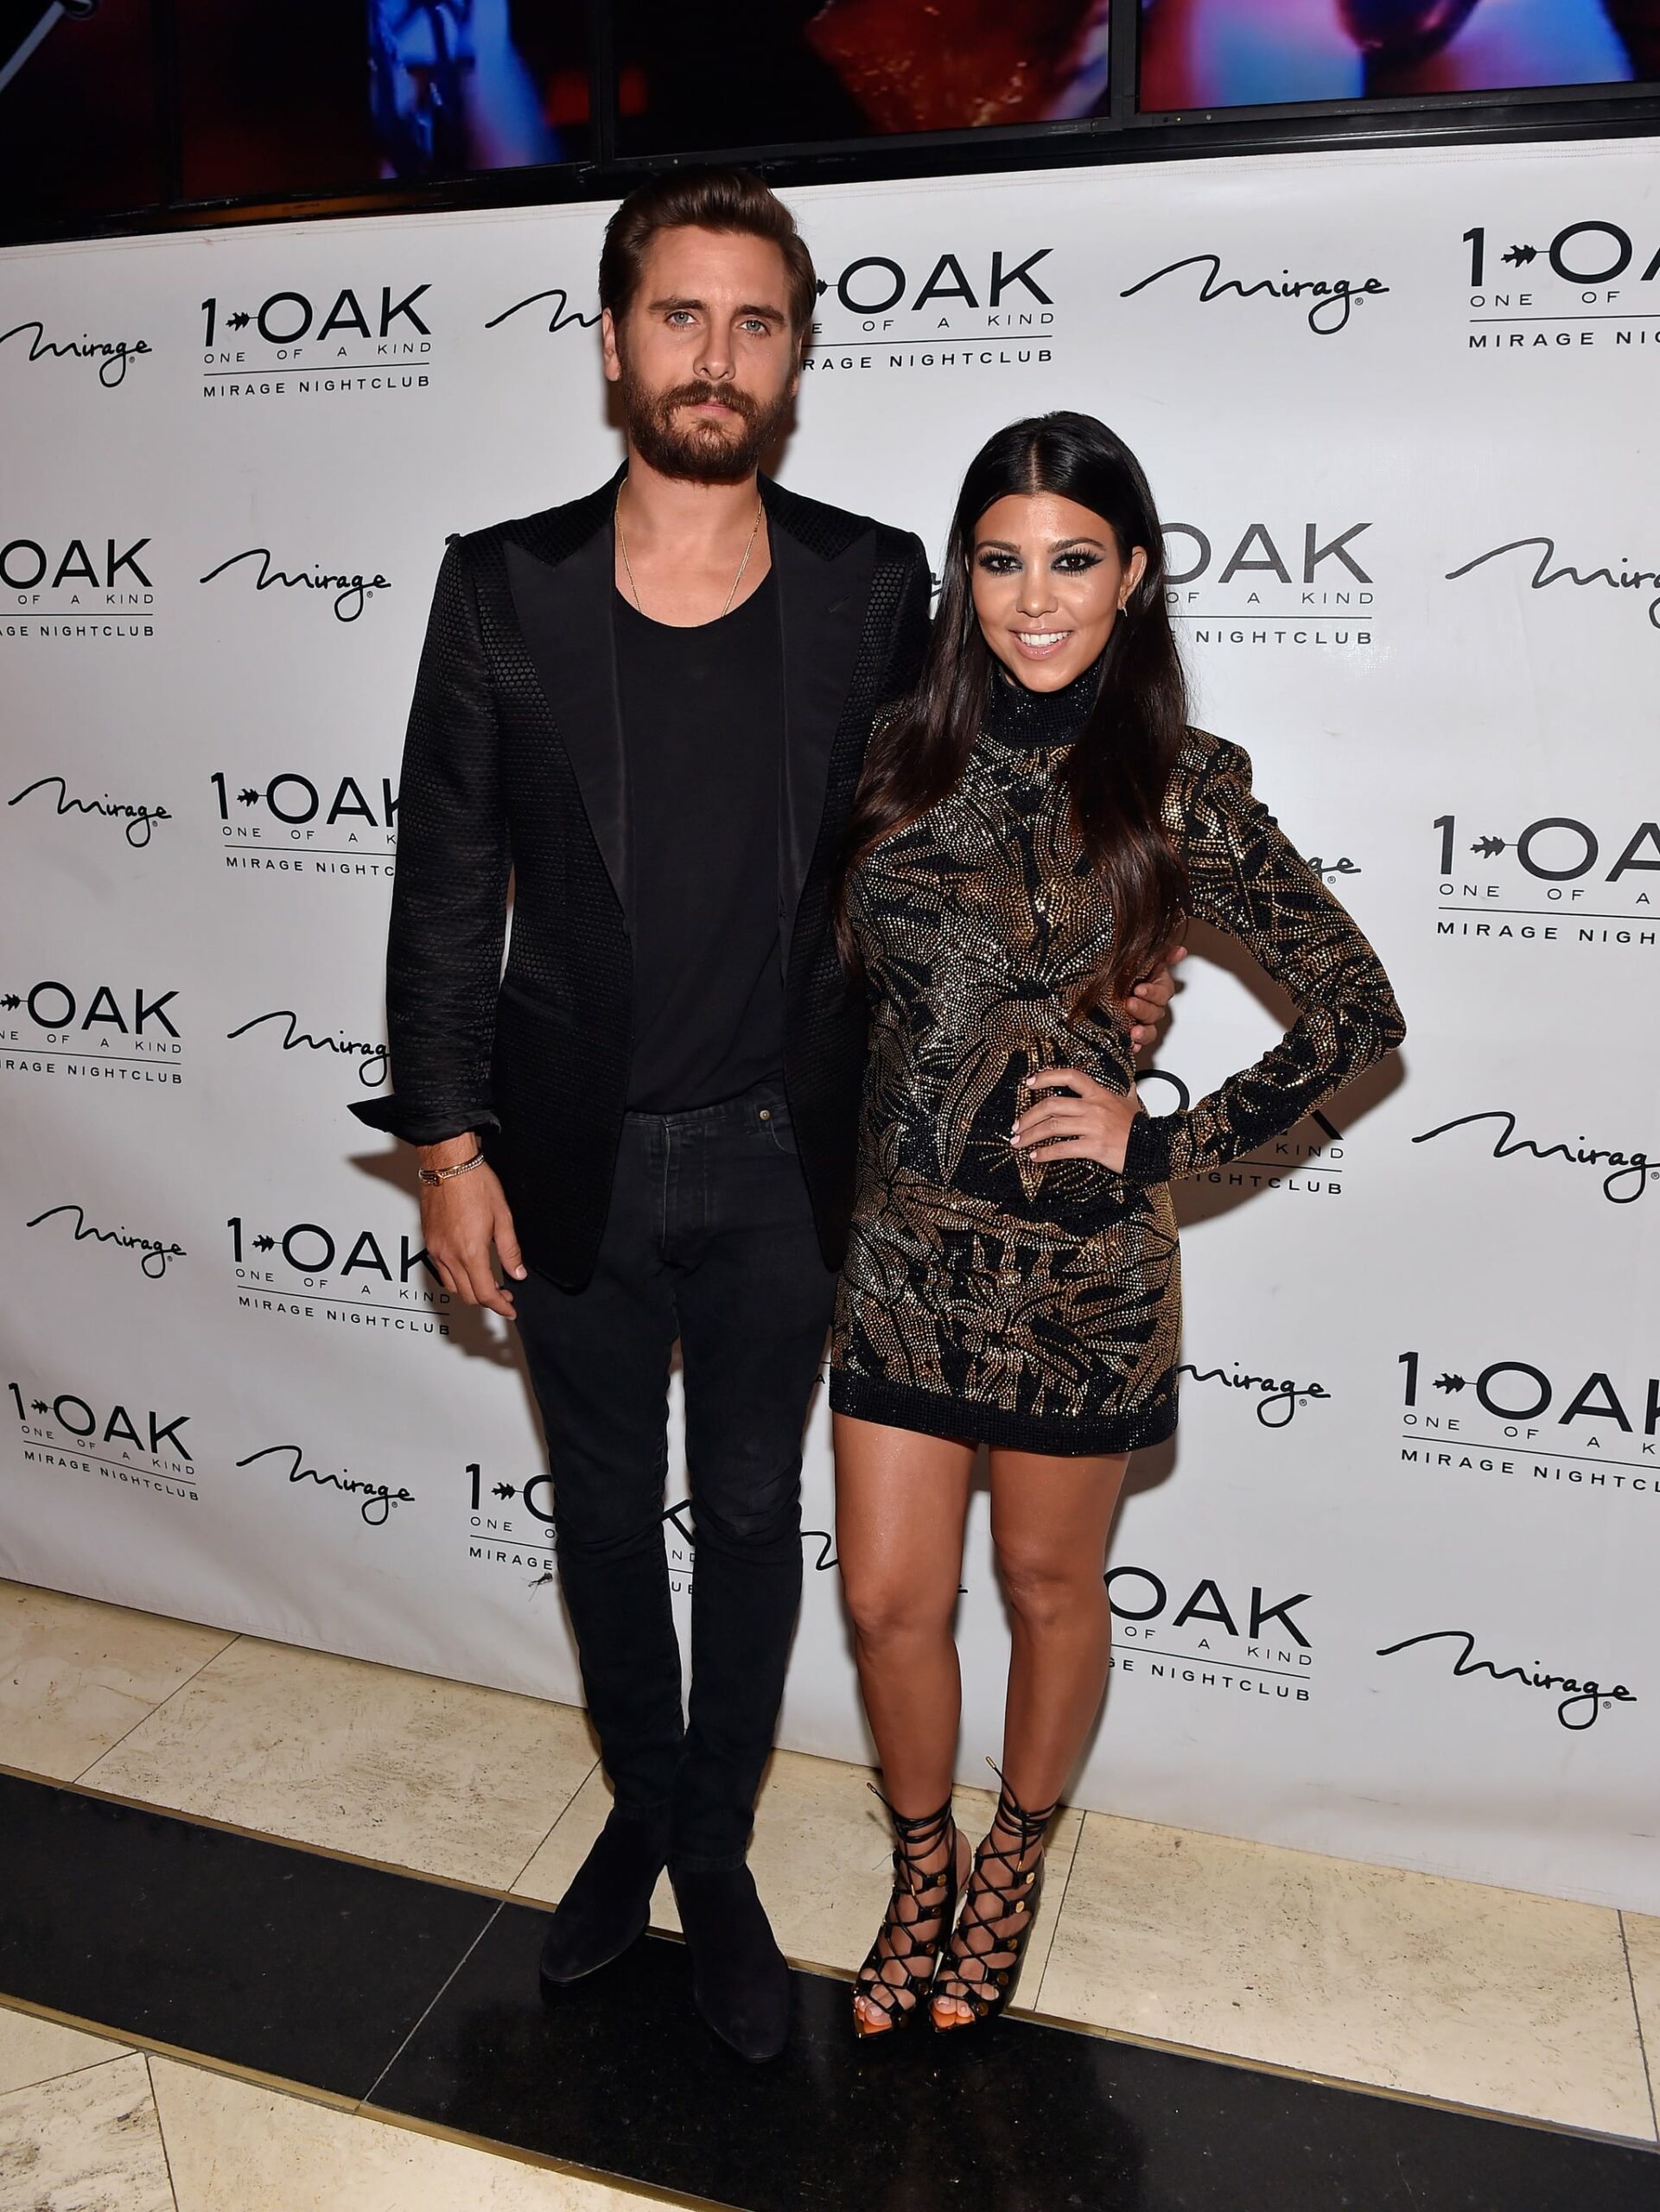 LAS VEGAS, NV - MAY 23:  Television personalities Scott Disick (L) and Kourtney Kardashian arrive at his birthday celebration at 1 OAK Nightclub at The Mirage Hotel & Casino on May 23, 2015 in Las Vegas, Nevada.  (Photo by David Becker/WireImage)